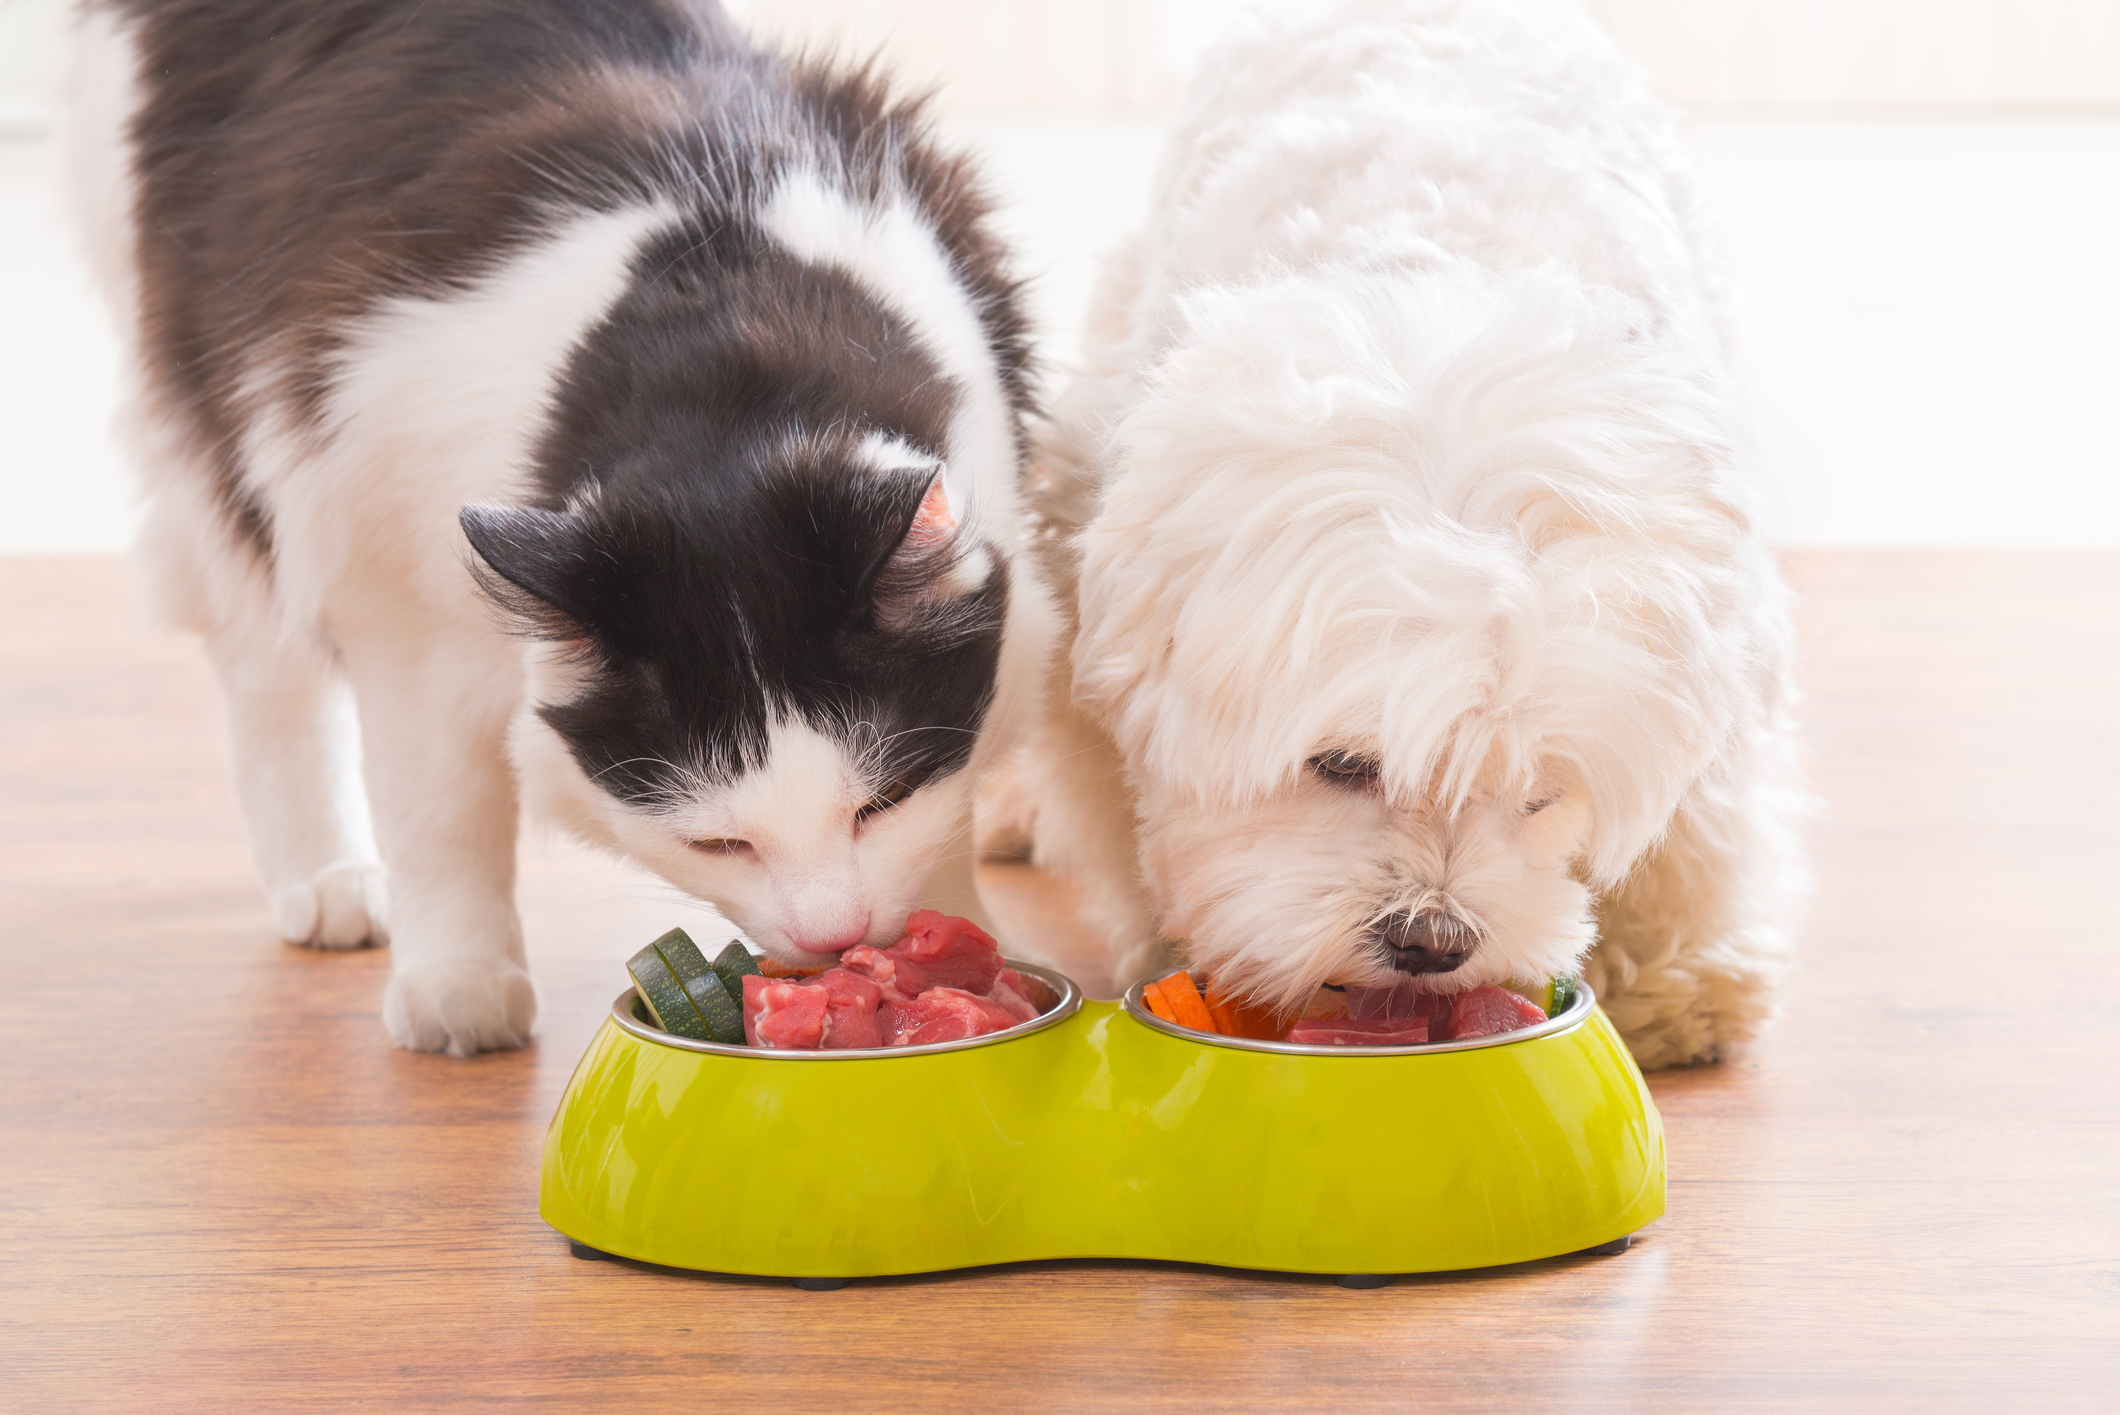 A cat and dog eating from a bowl

Description automatically generated